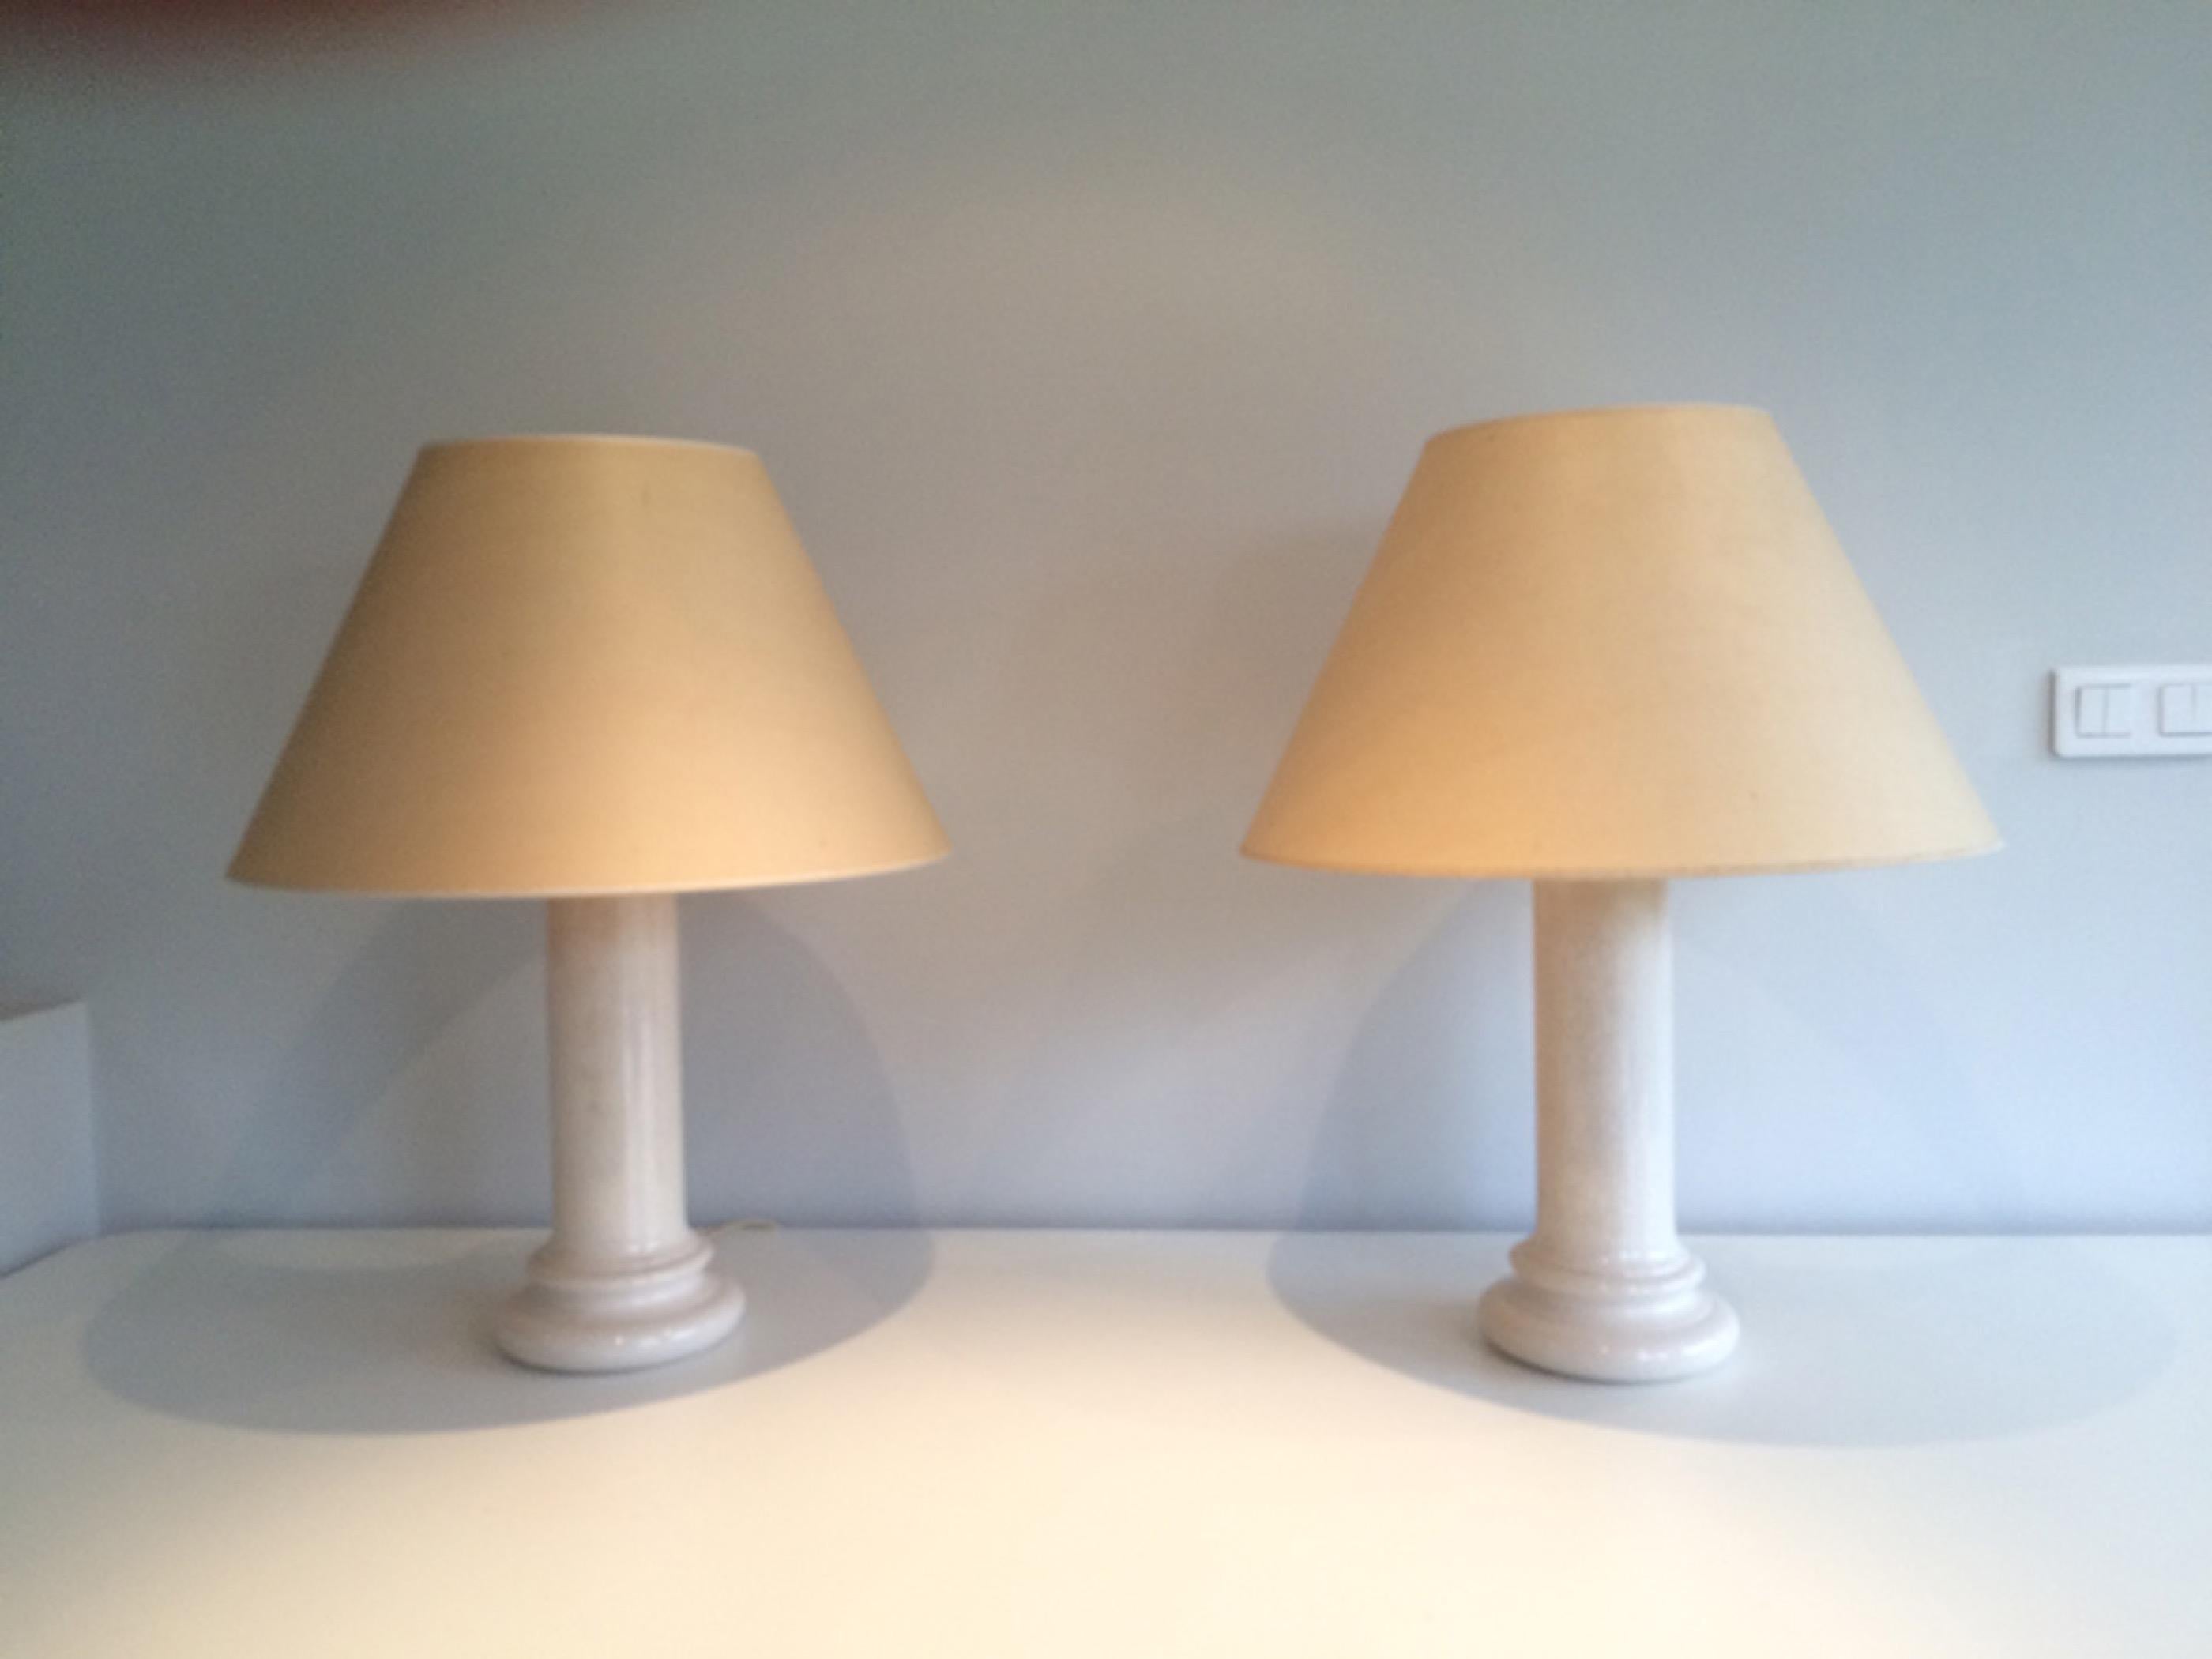 Pair of White Cracked Ceramic Lamps, circa 1970 For Sale 7